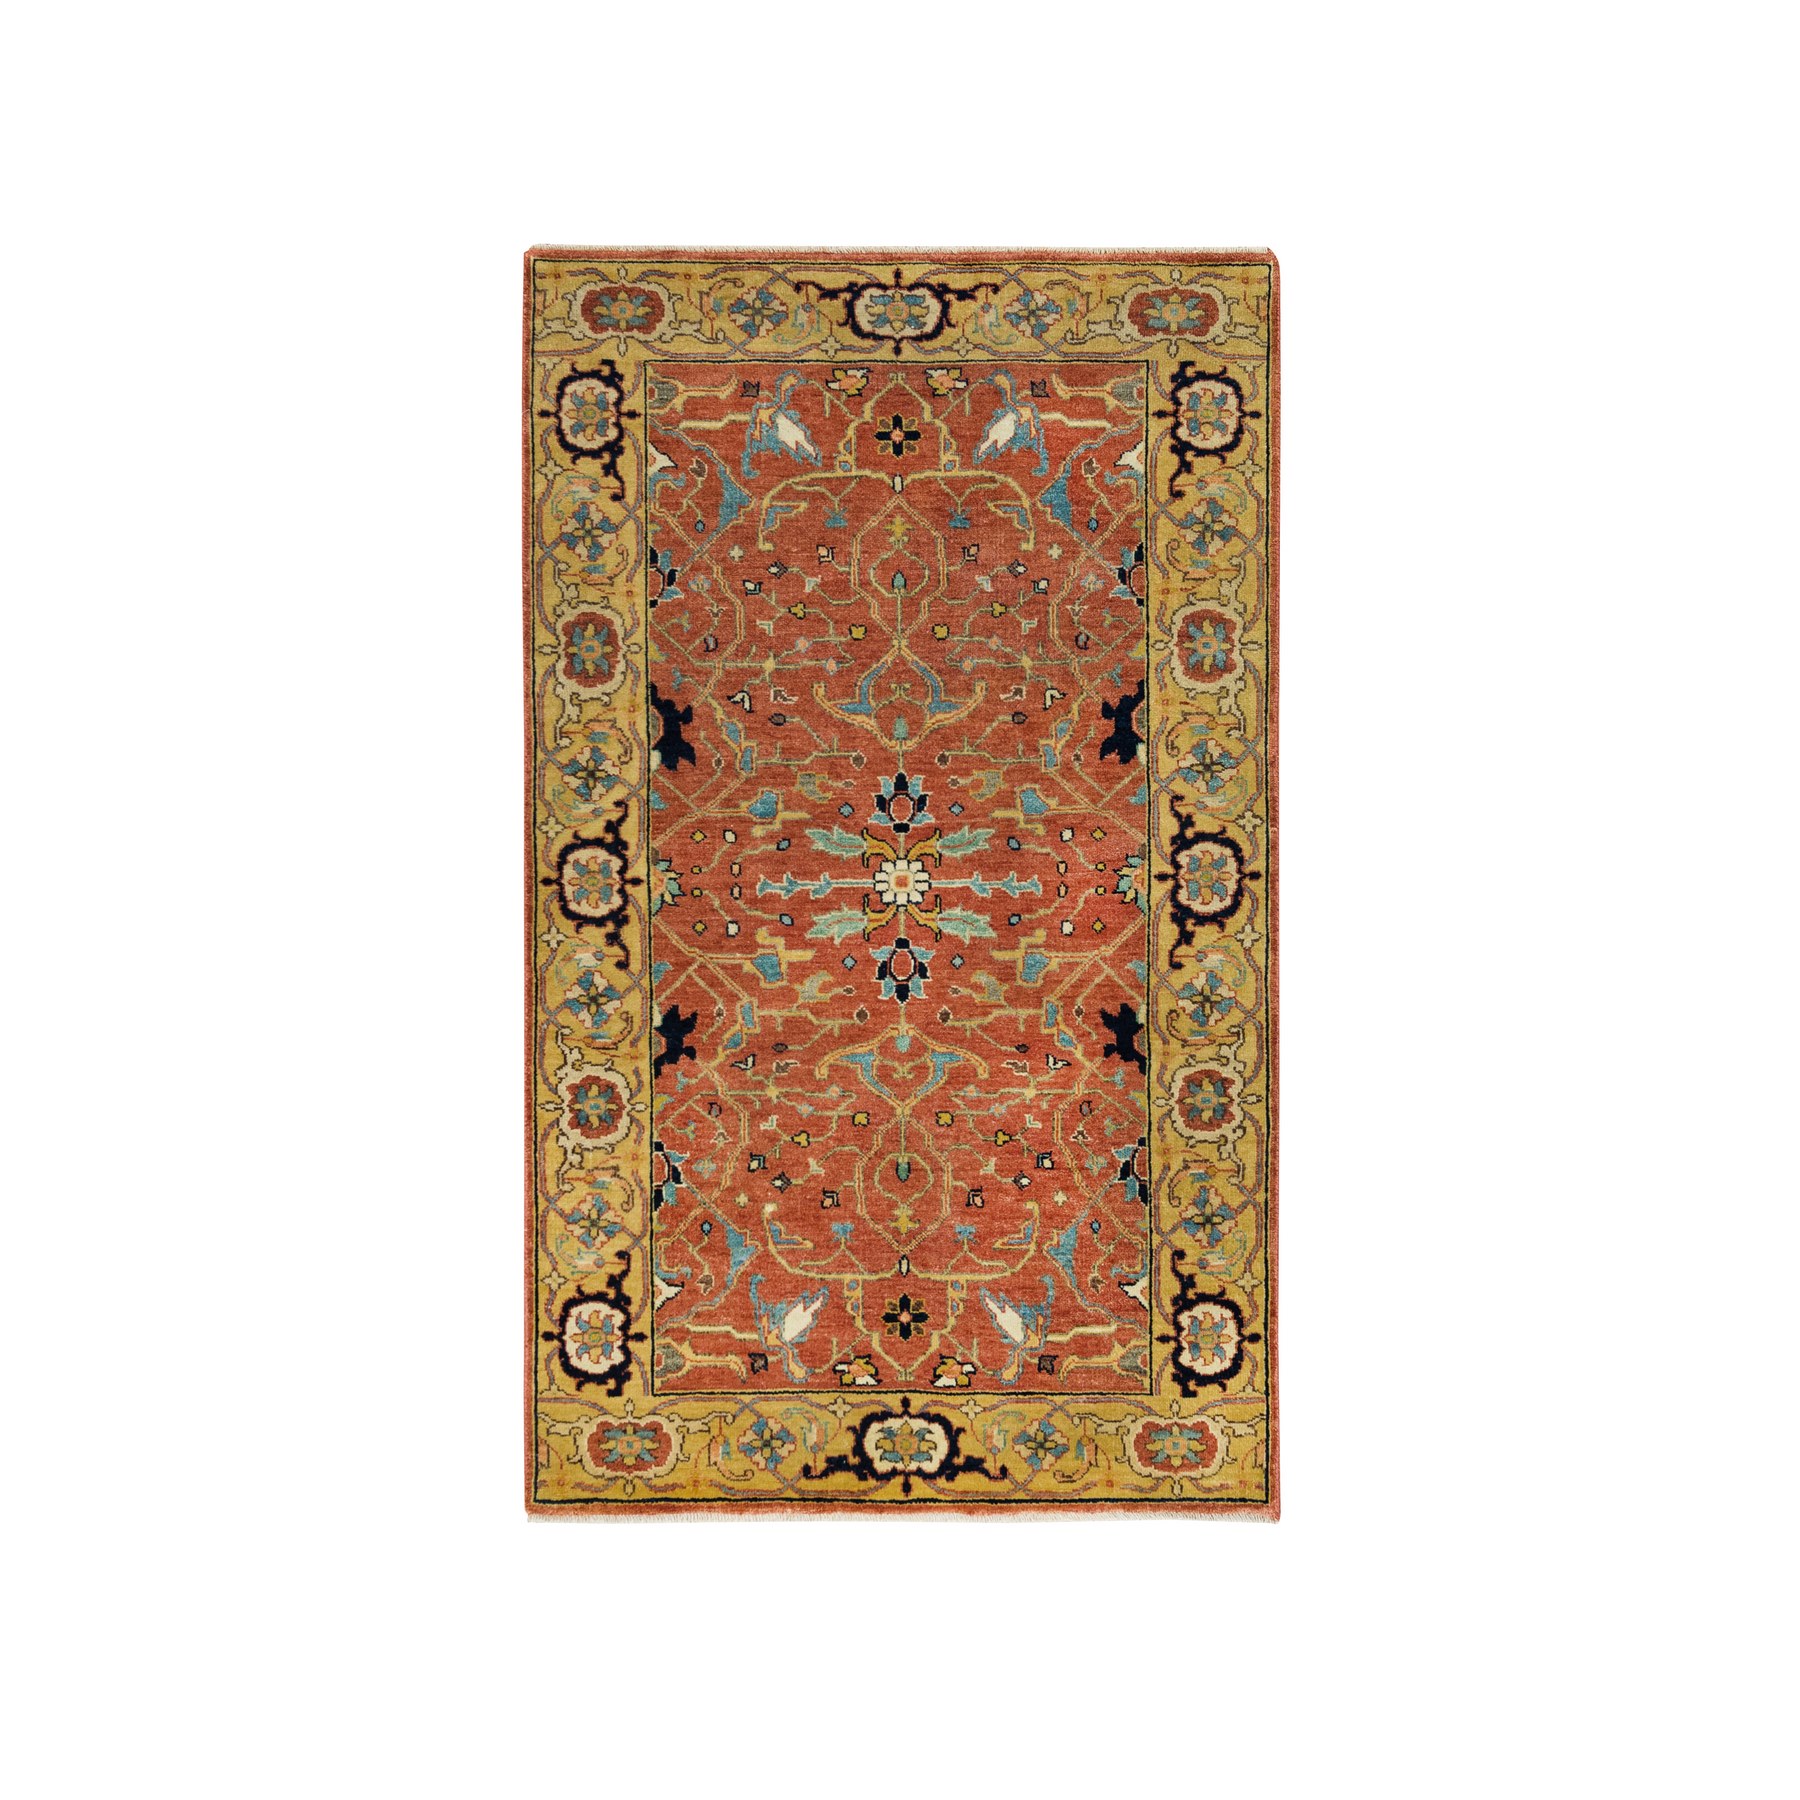  Wool Hand-Knotted Area Rug 3'1